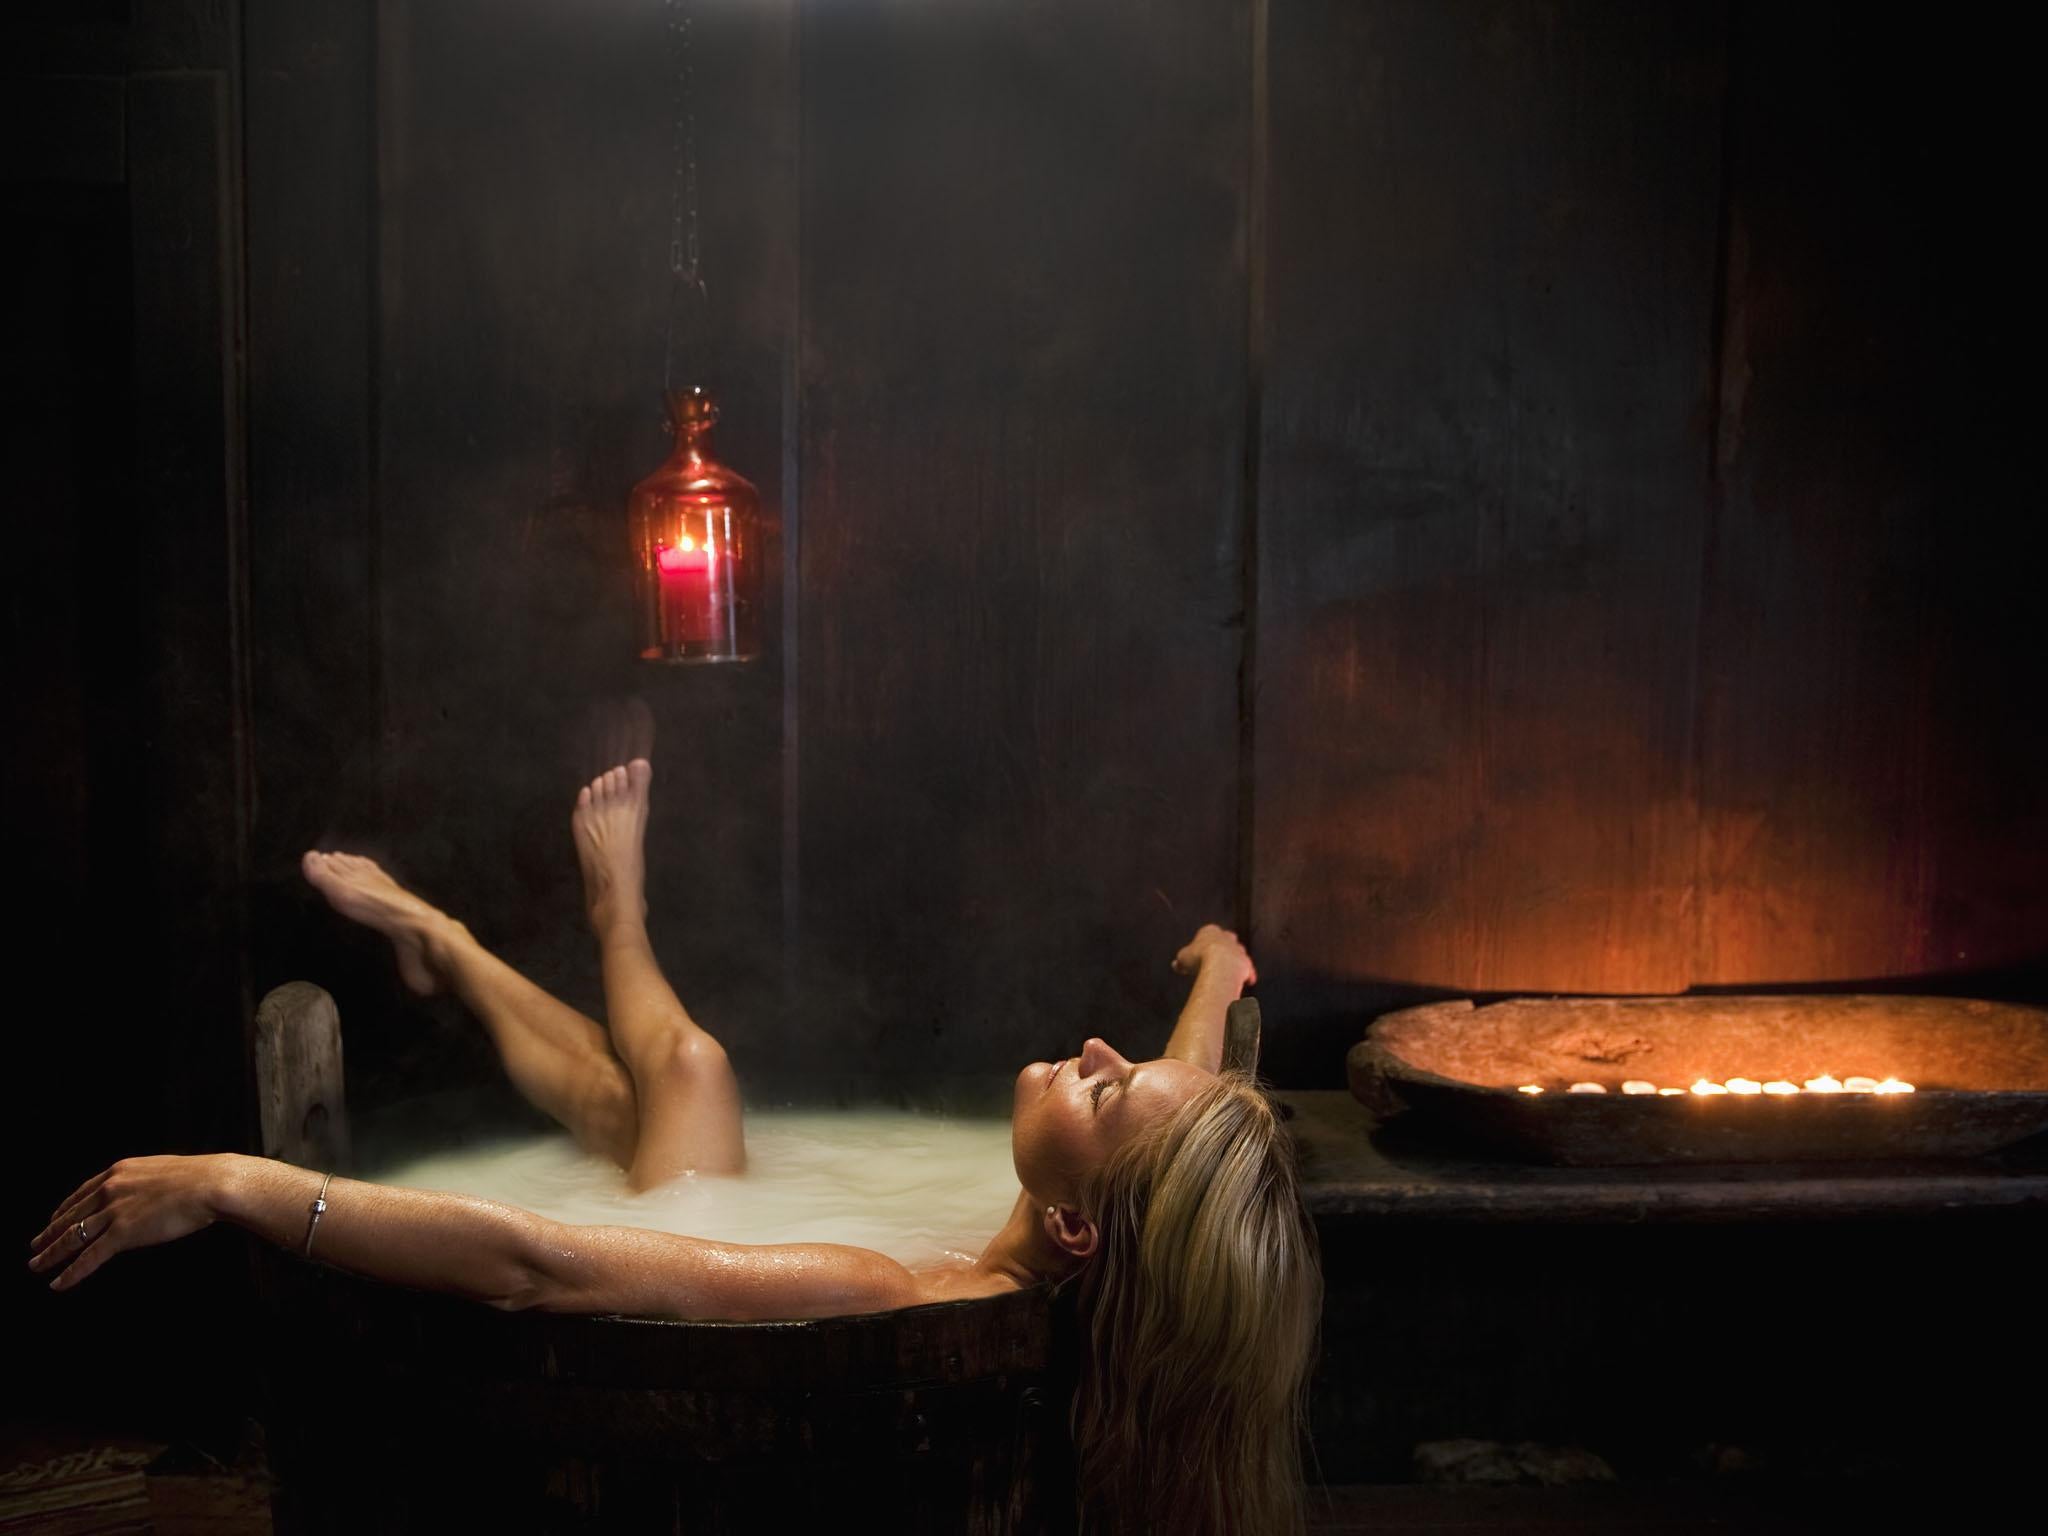 A sensuous soak is the perfect way to melt all of the day’s stresses